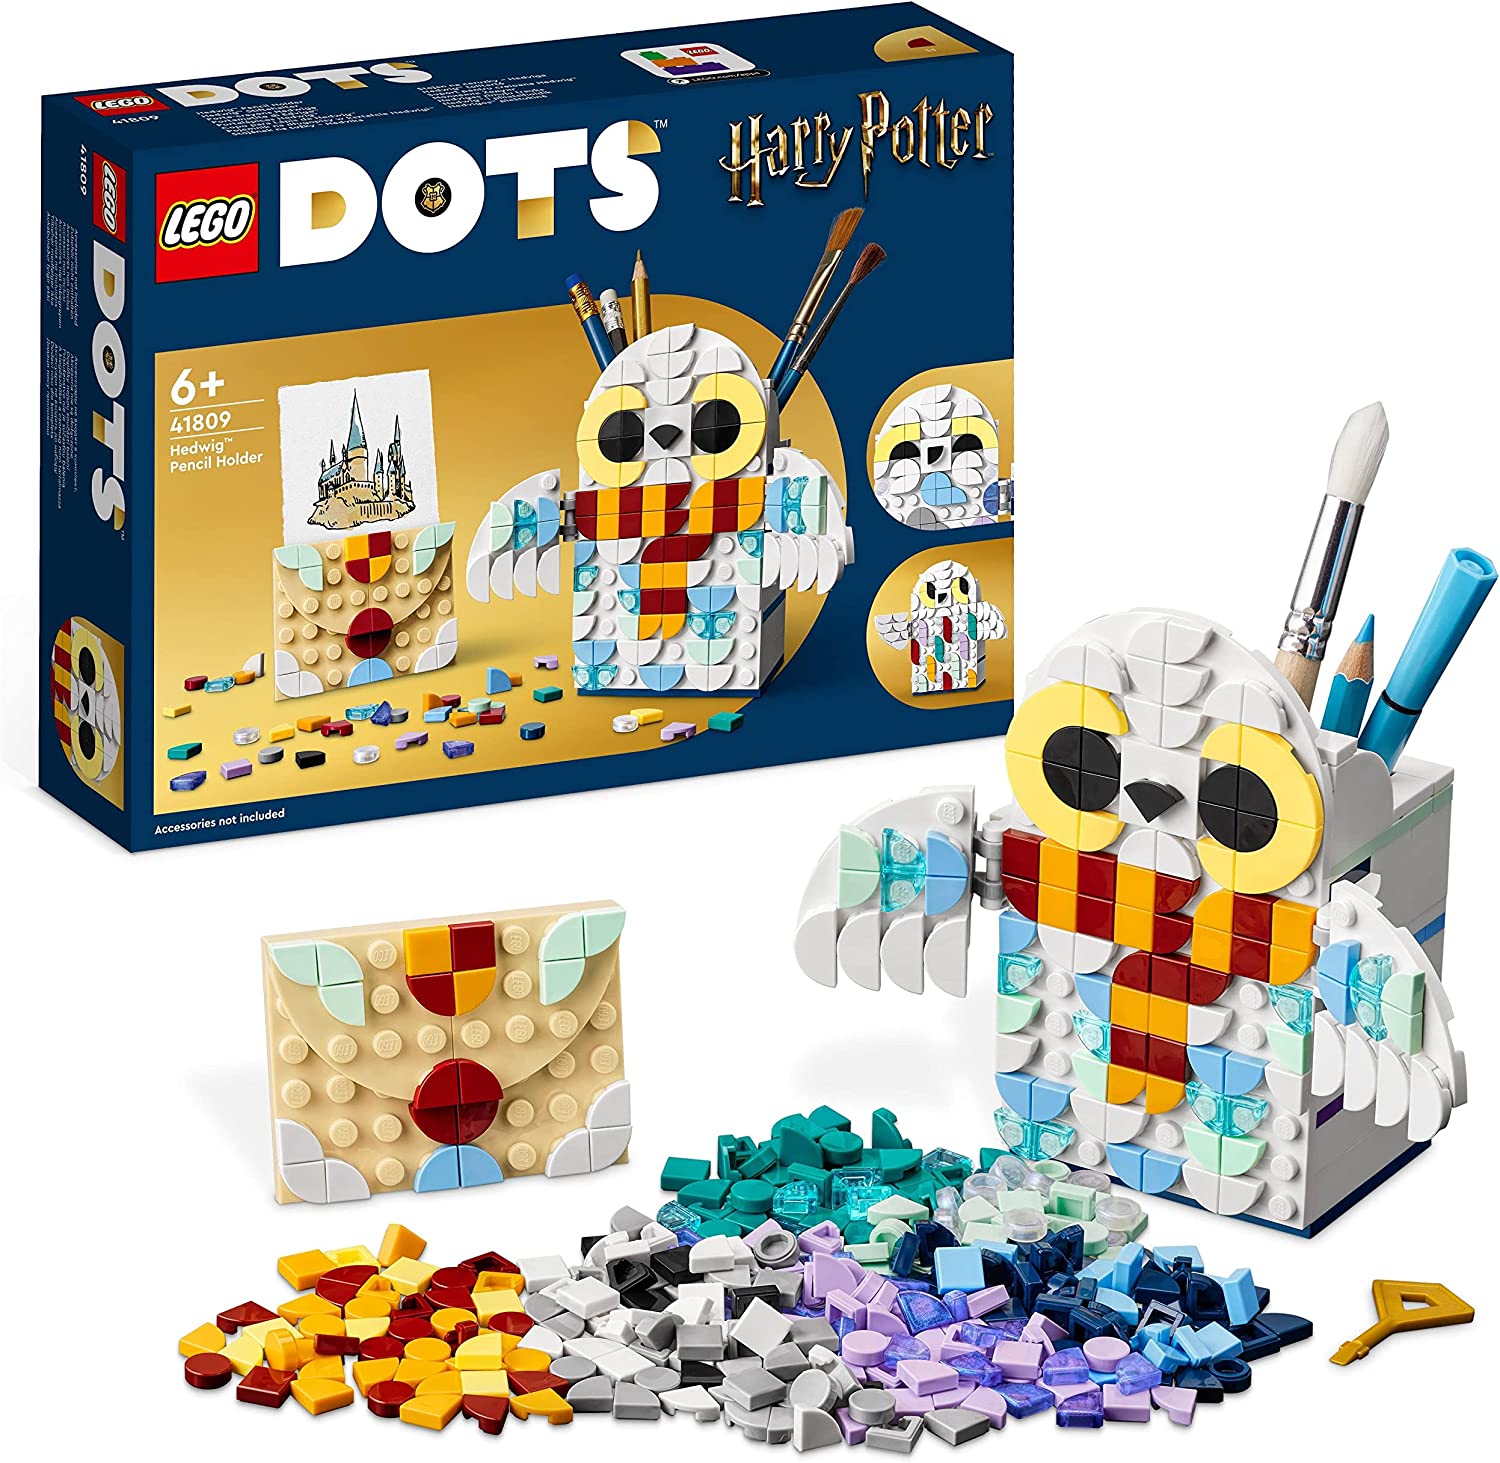 LEGO 41809 Dots Hedwig Pen Holder, Harry Potter Owl Desk Accessories, Pencil Pot and Memo Holder, Toy Craft Kit for Kids, School Supplies